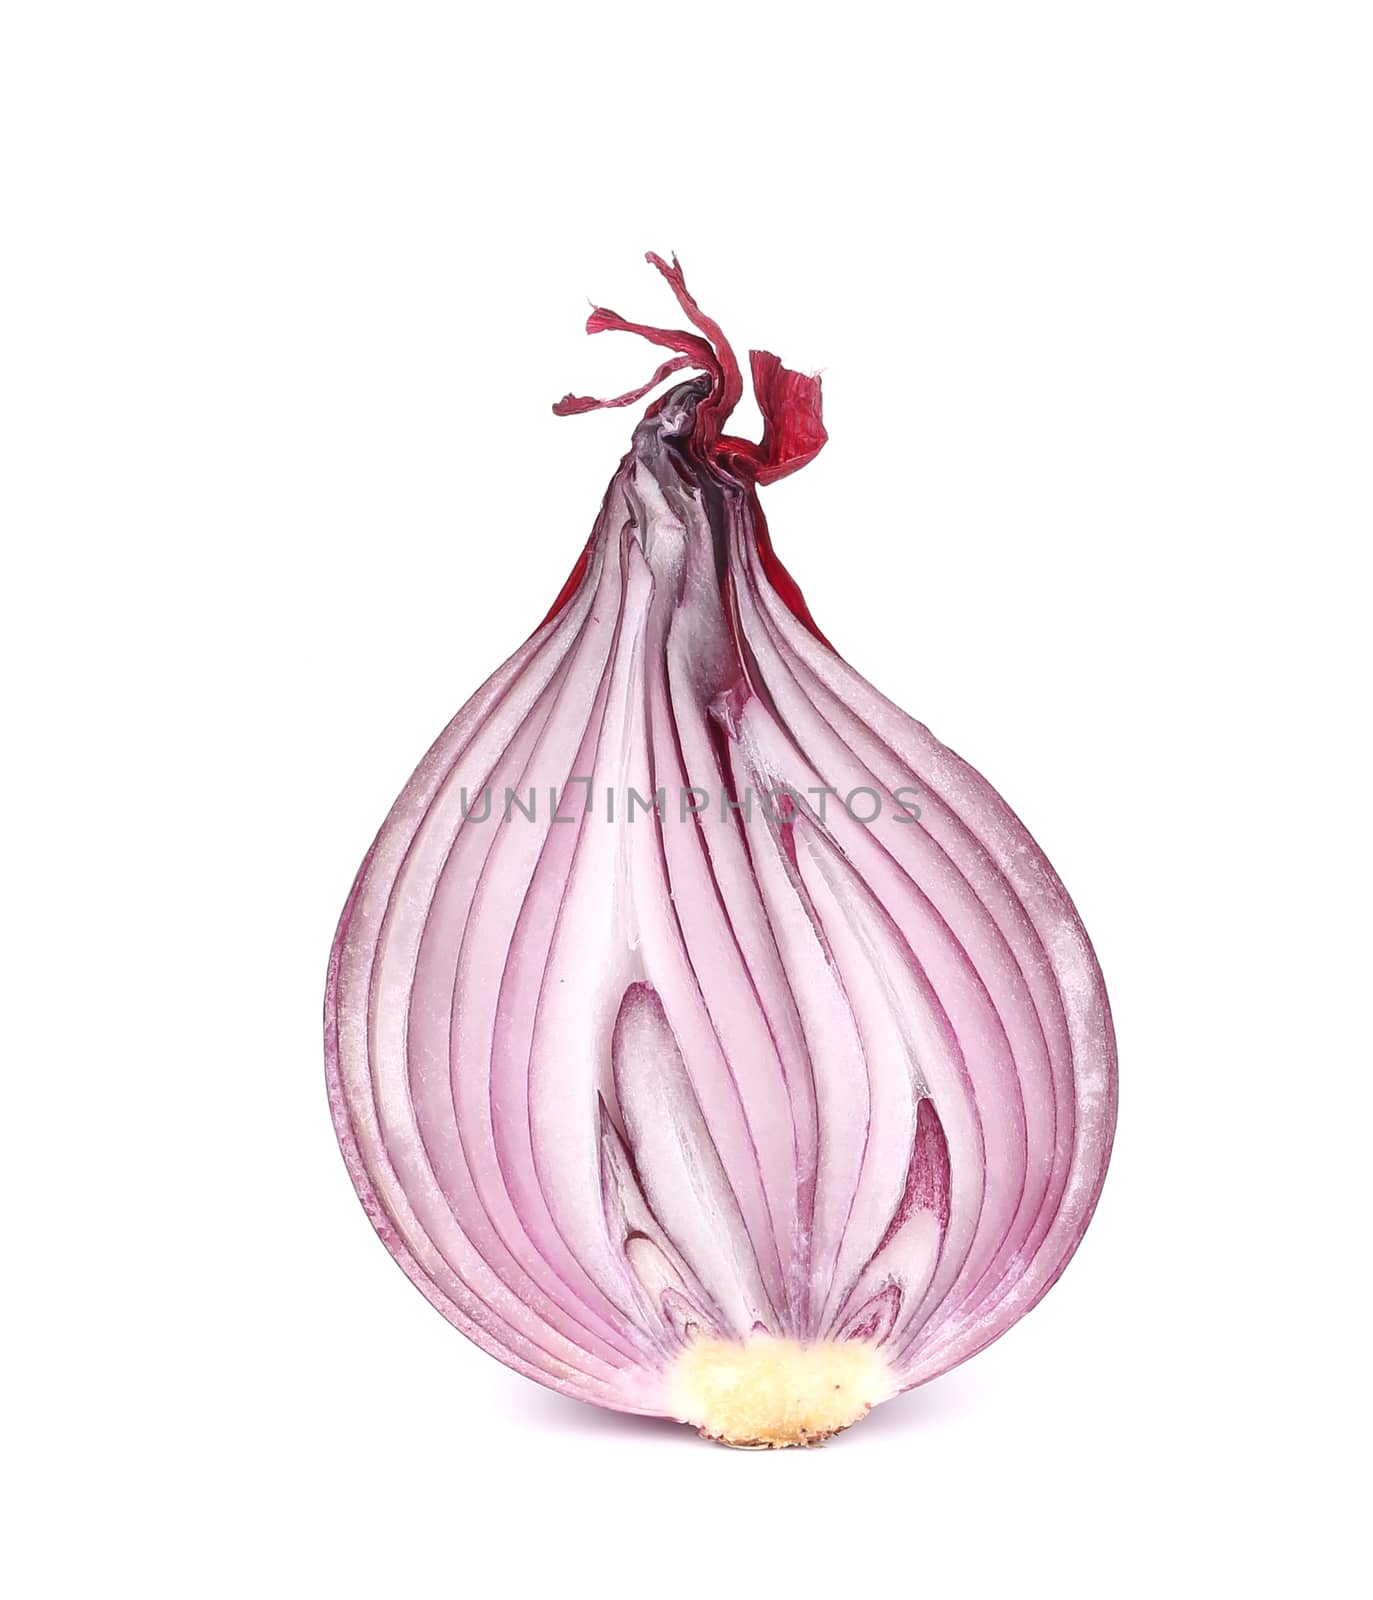 Sliced of red onion. Isolated on a white background.